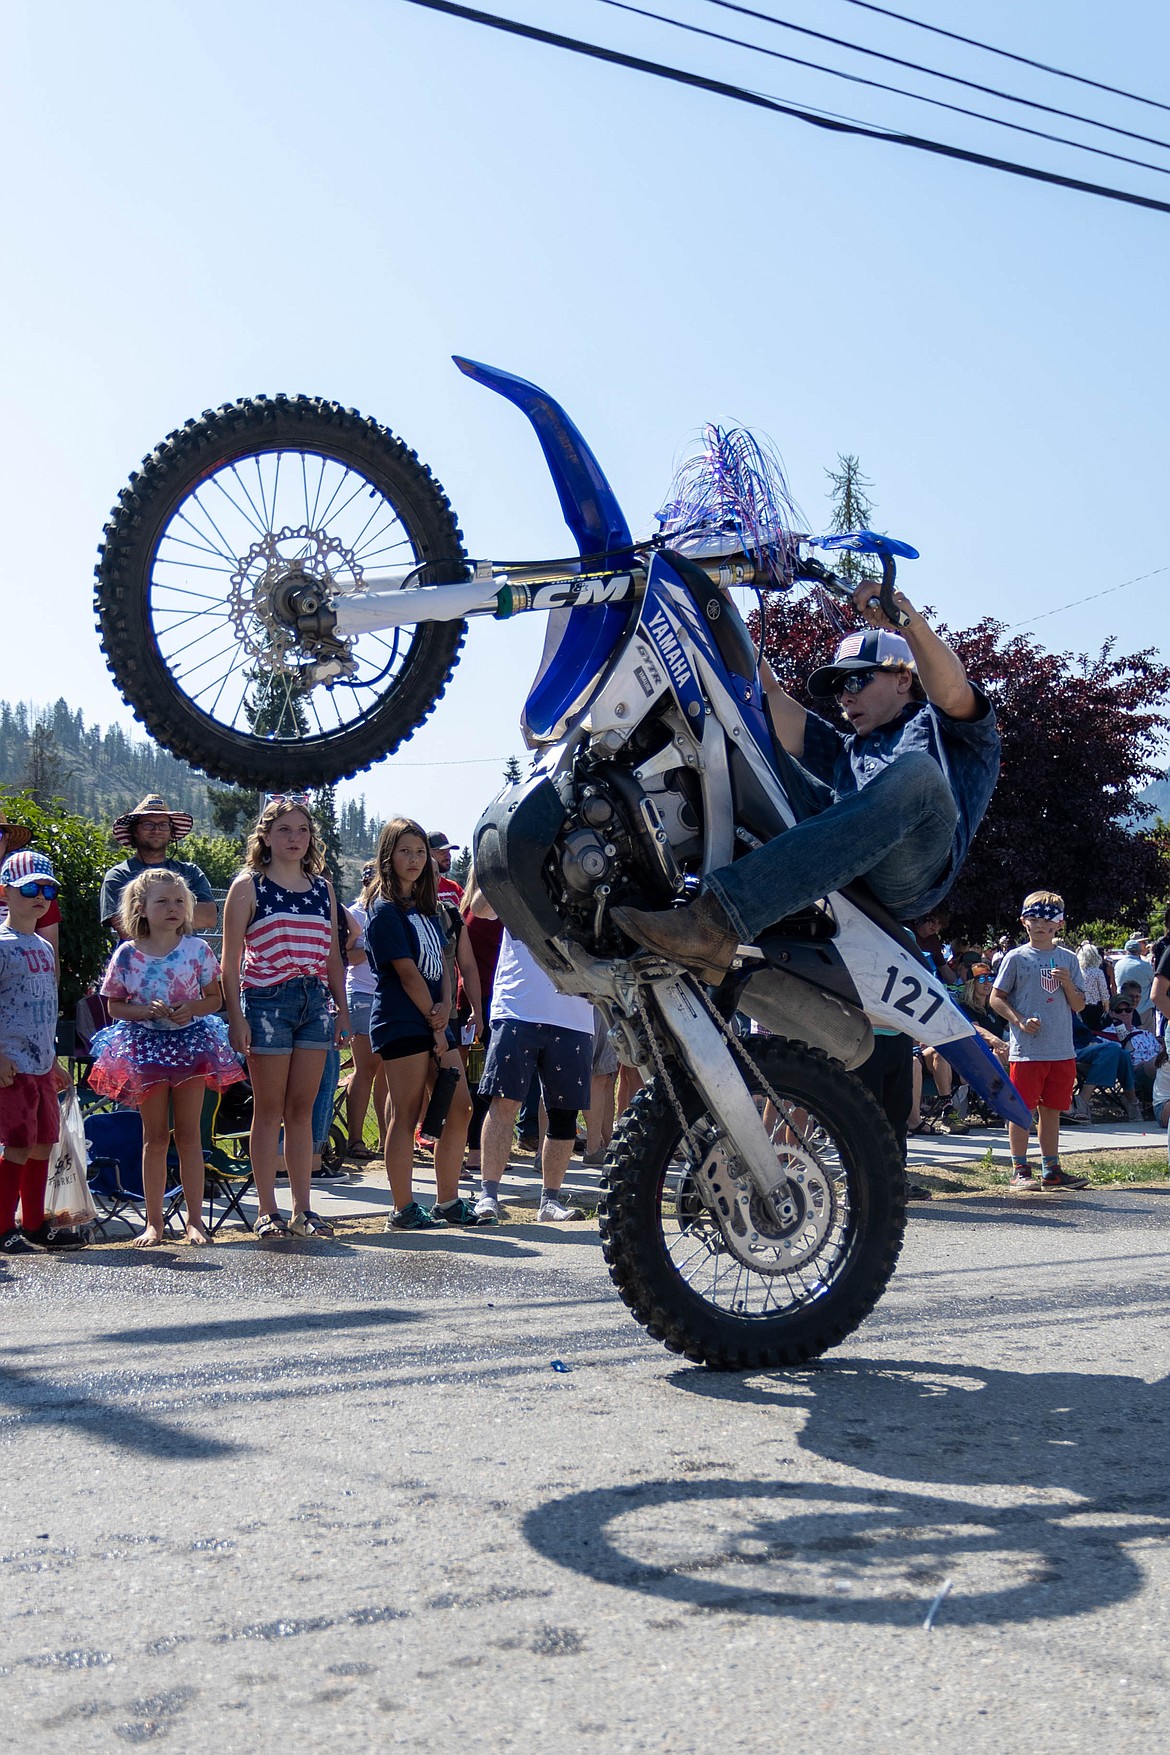 A motorcycle rider pops a wheelie during the Clark Fork Fourth of July parade on Tuesday.